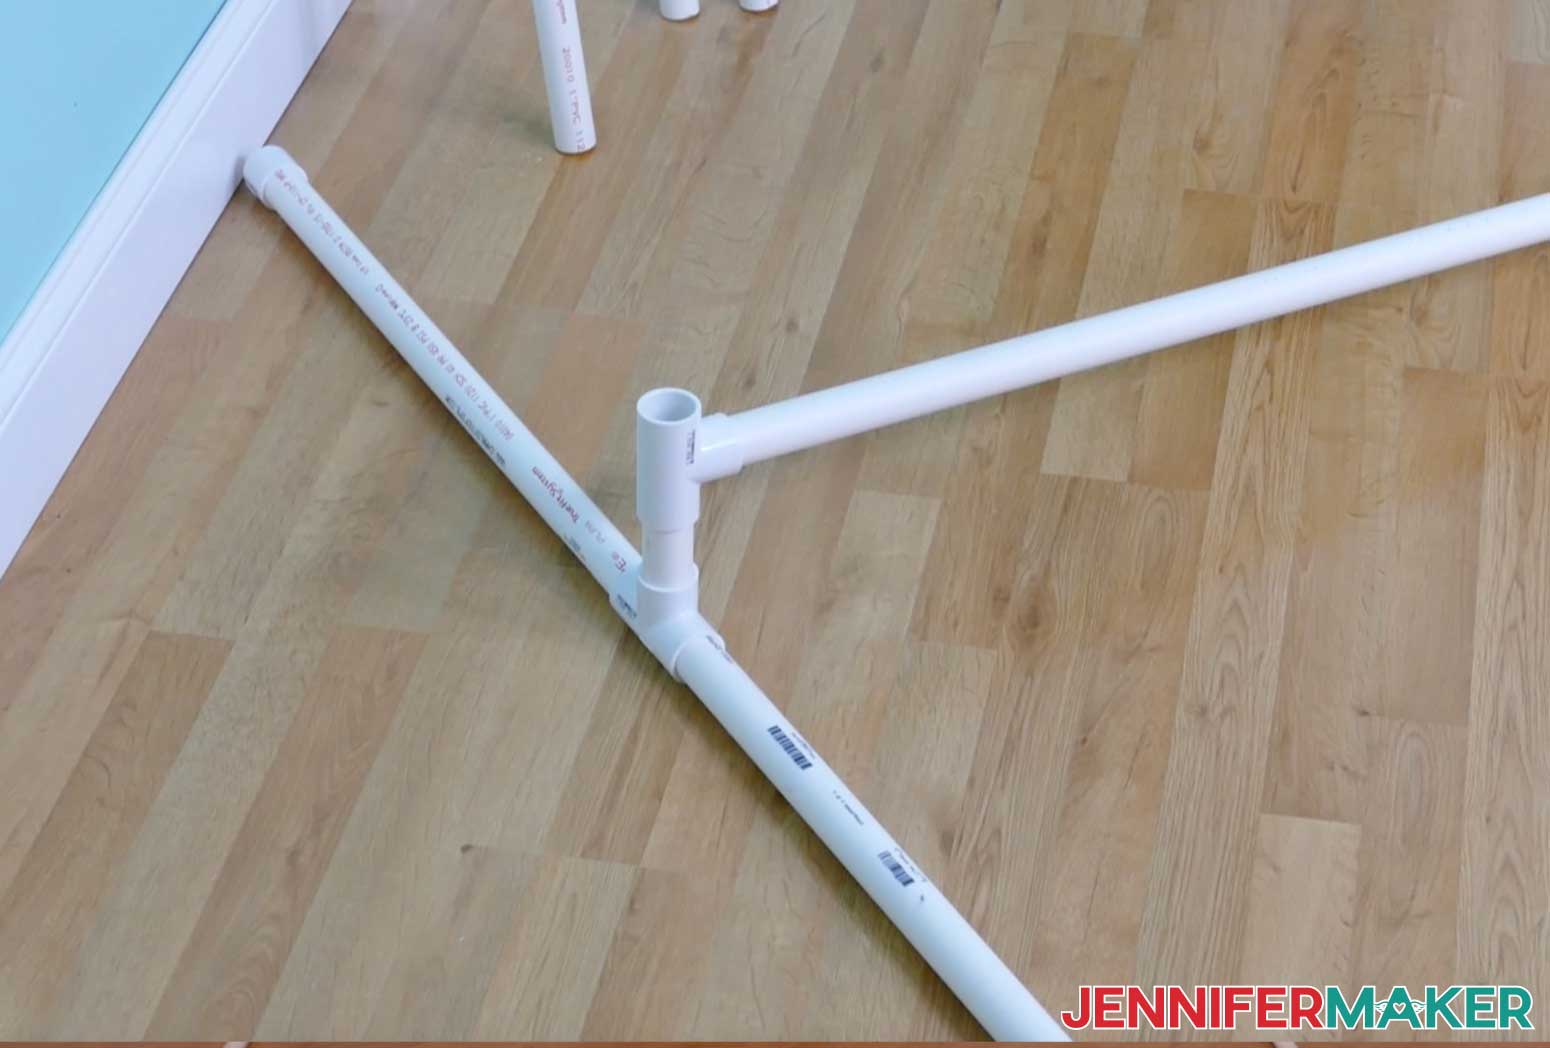 A 92" long PVC pipe inserted into a Tee connector to form a DIY backdrop stand